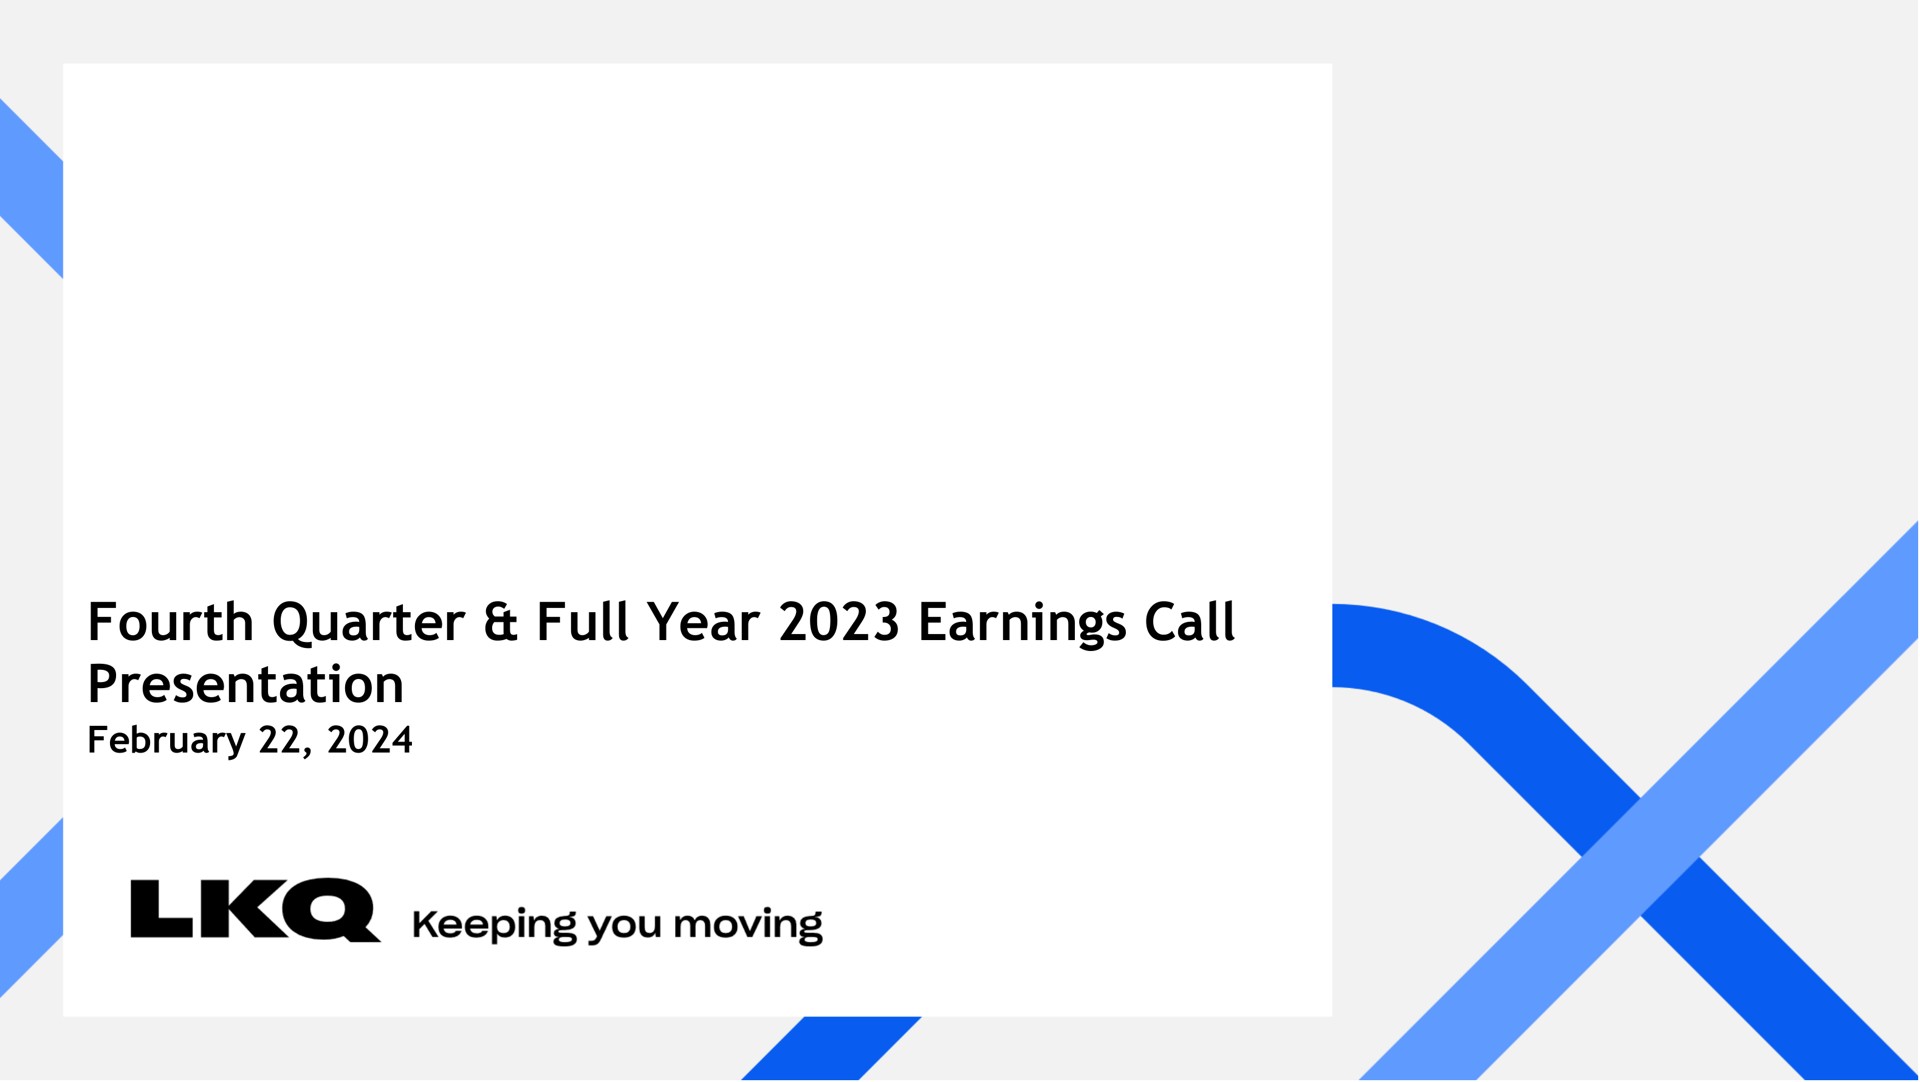 fourth quarter full year earnings call presentation keeping you moving | LKQ